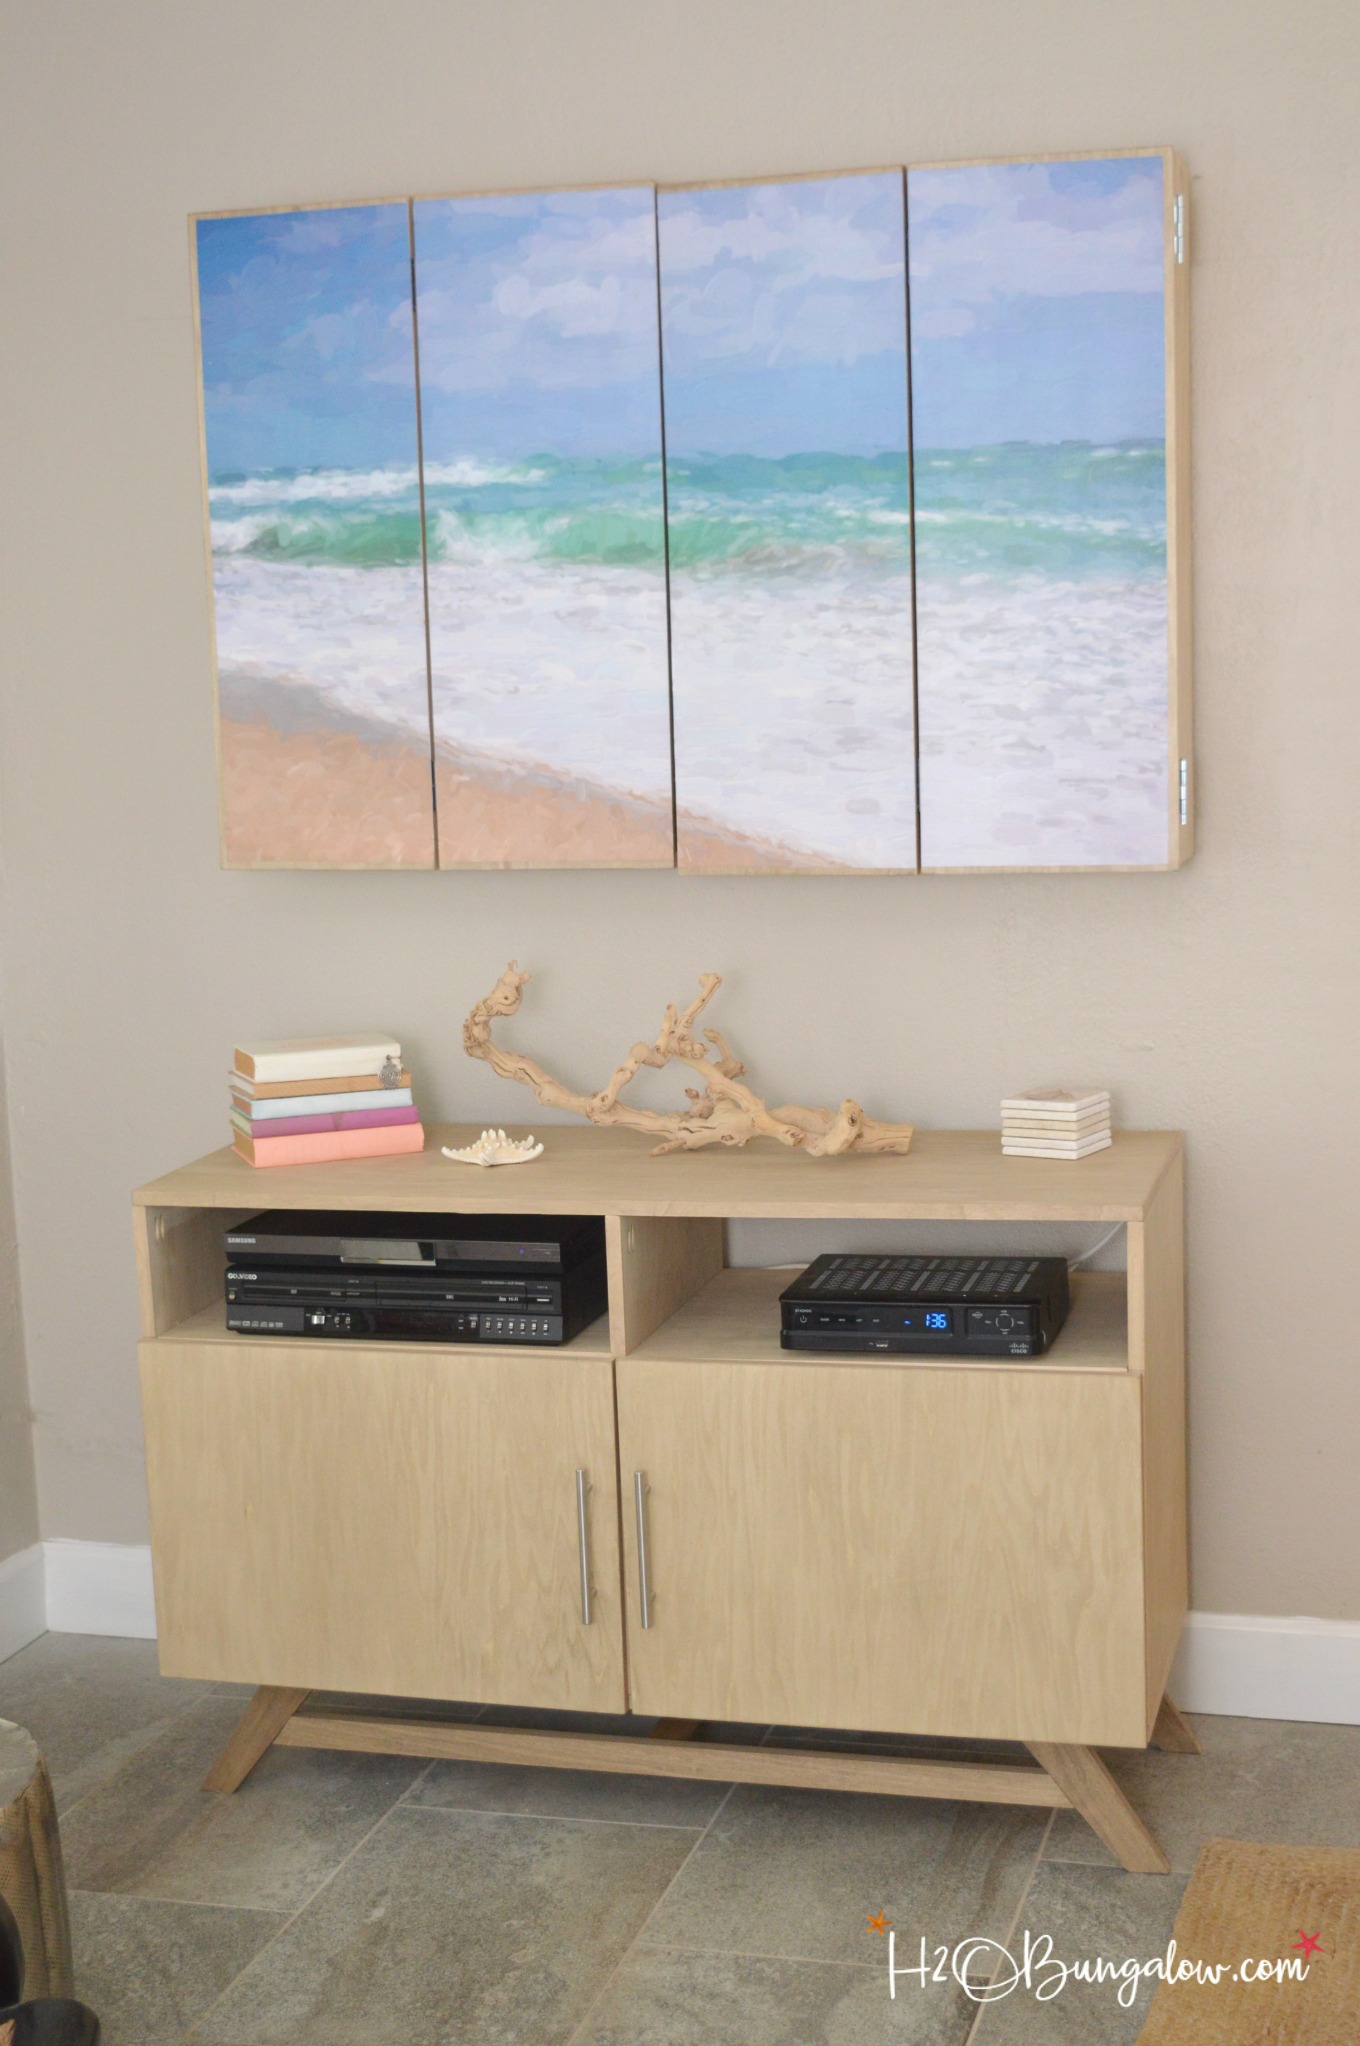 DIY media console with free plans tutorial. Build a media cabinet to hold electronics, add the matching wall mounted TV cabinet for under $150! Looks great in small spaces! Find over 450 DIY tutorials to make your home pretty at H2OBungalow.com #DIYmediaconsole